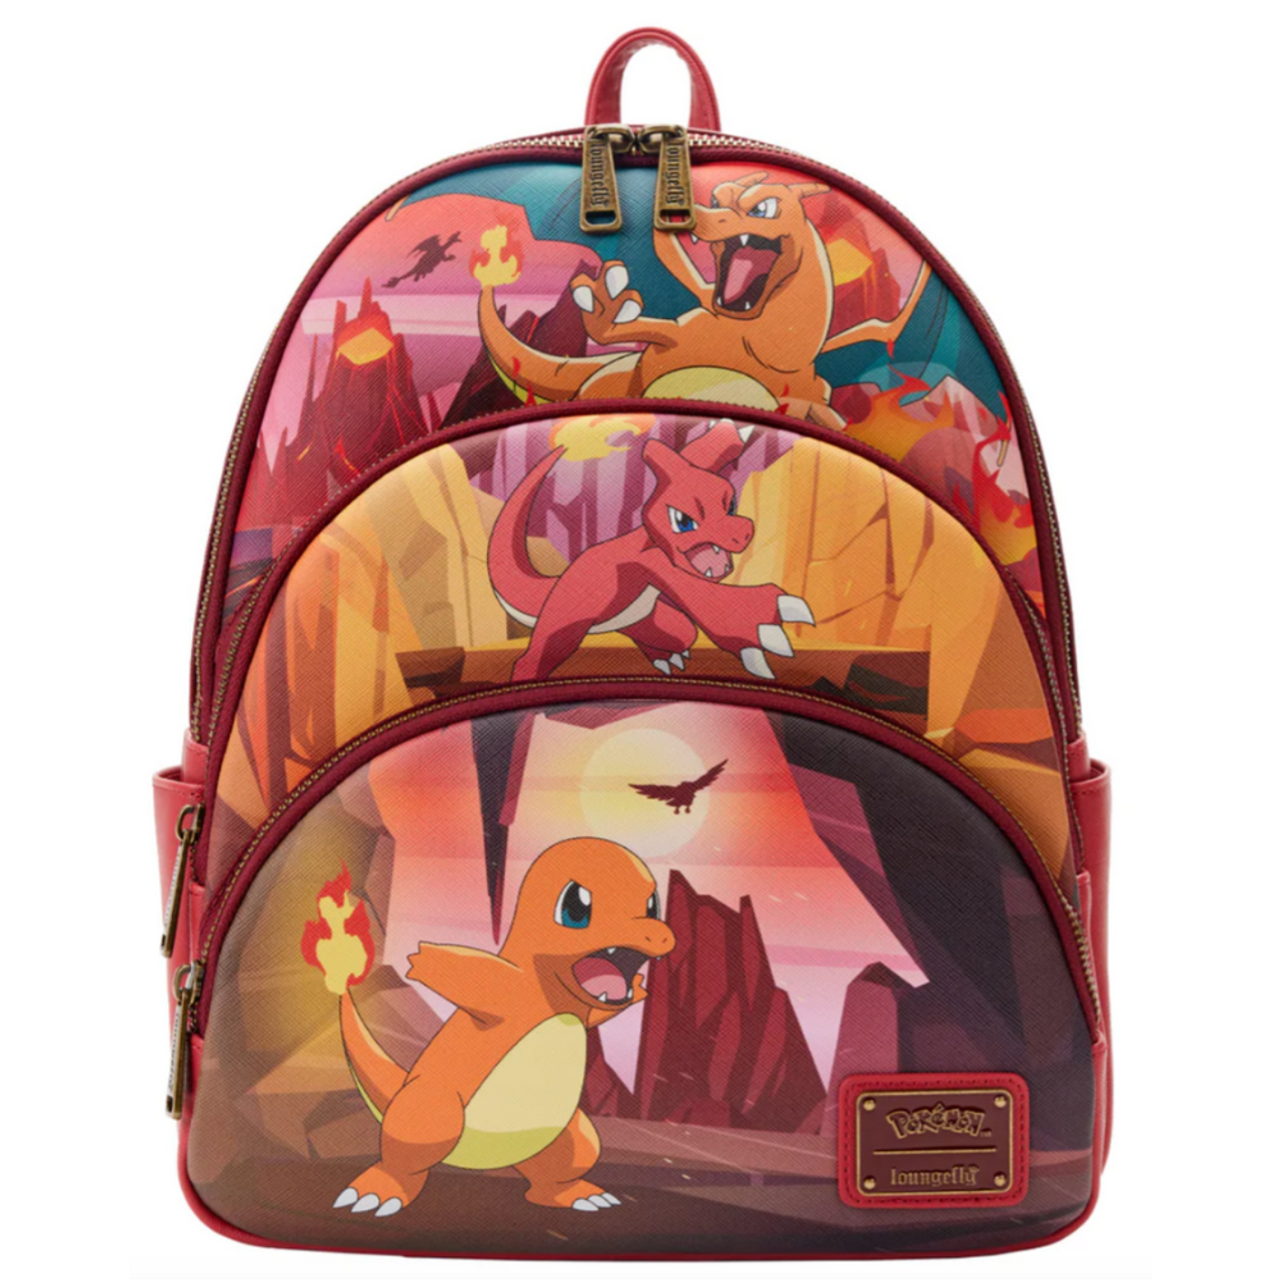 https://cdn11.bigcommerce.com/s-c9a80/images/stencil/1280x1280/products/15163/54814/Pokemon_Charmander_Backpack__06084.1670091844.png?c=2